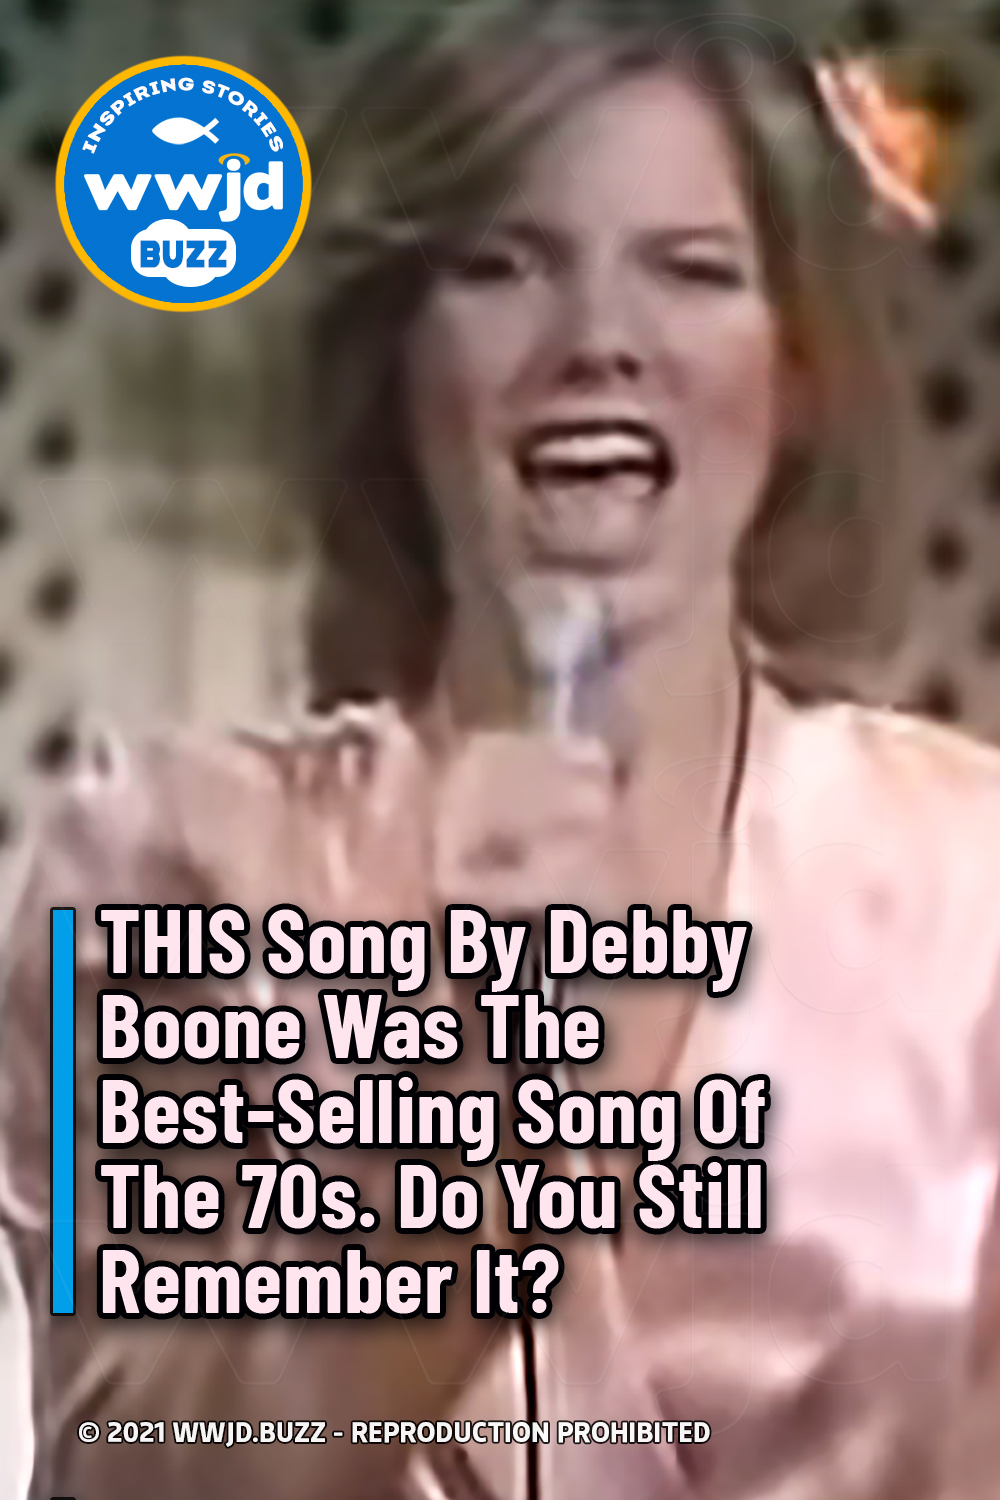 THIS Song By Debby Boone Was The Best-Selling Song Of The 70s. Do You Still Remember It?